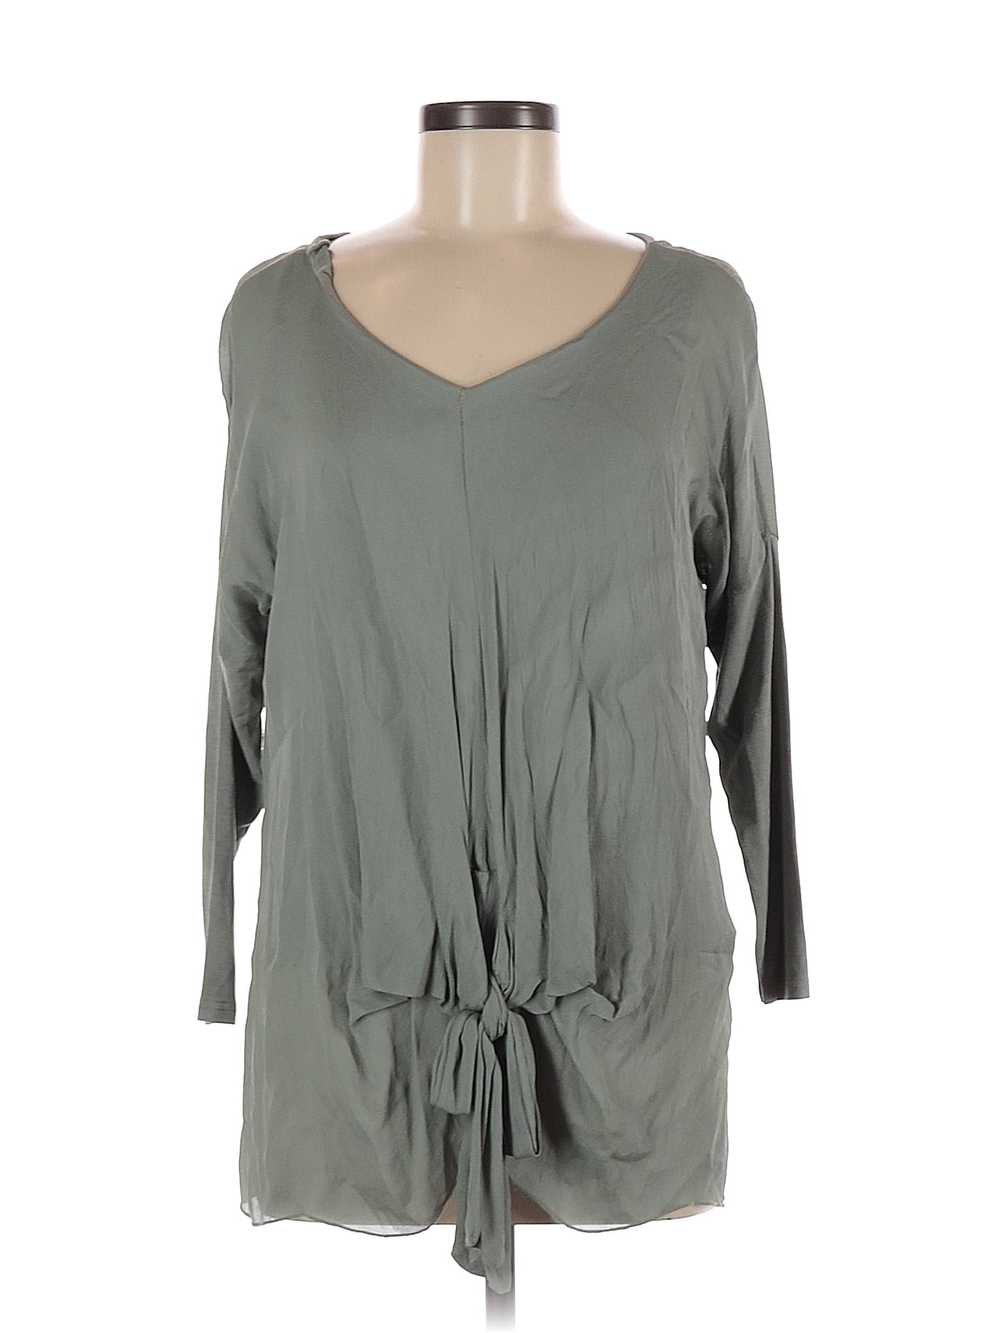 Cobble Stone Women Gray Long Sleeve Top One Size - image 1